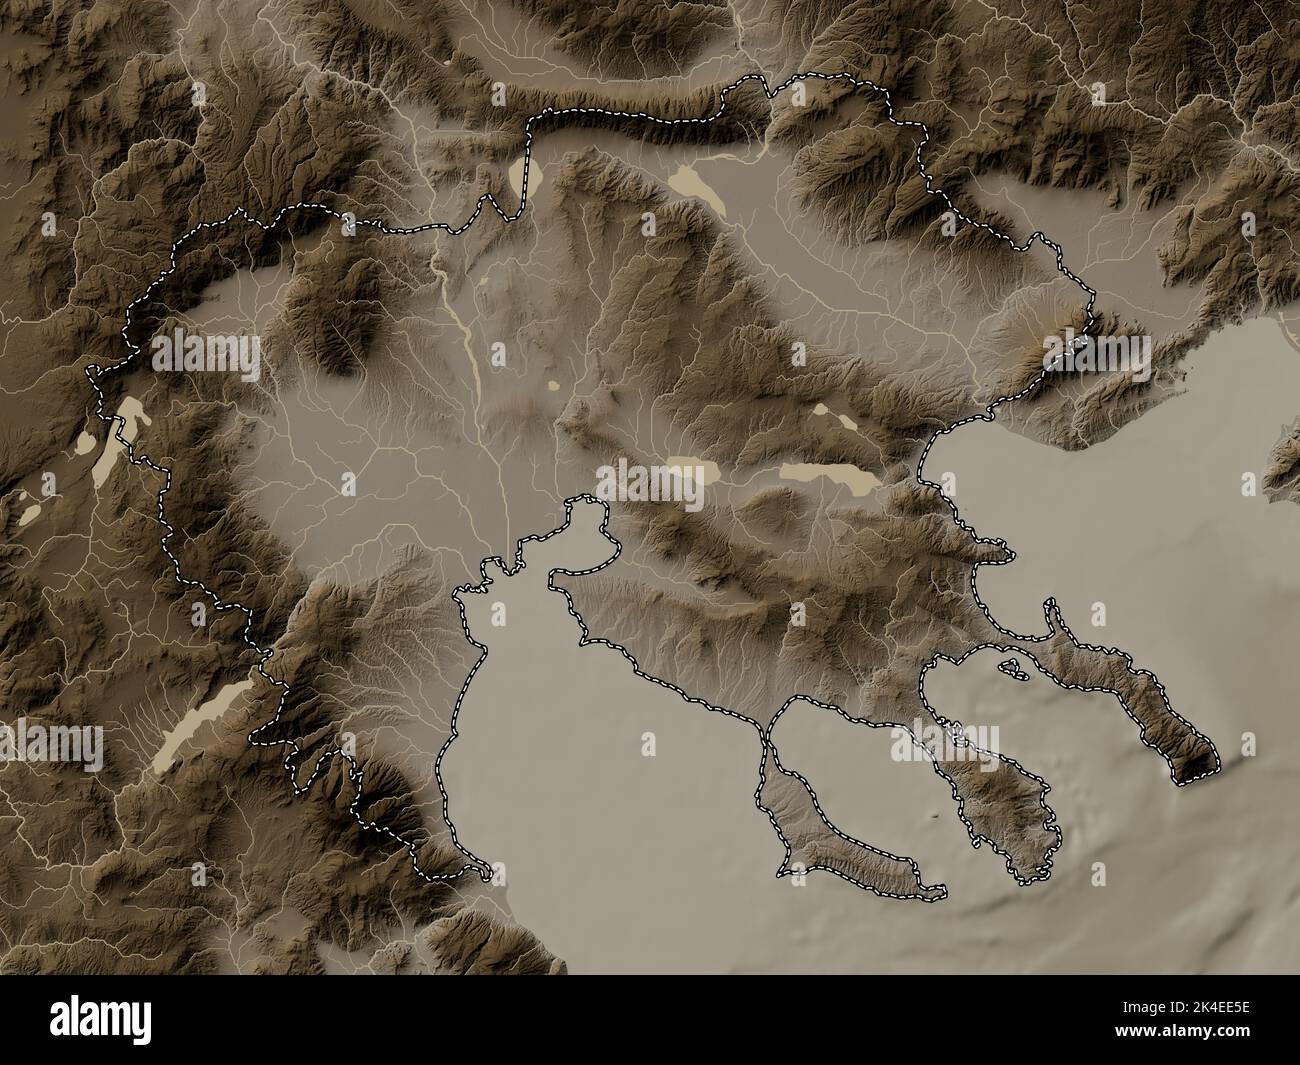 Central Macedonia, decentralized administration of Greece. Elevation map colored in sepia tones with lakes and rivers Stock Photo